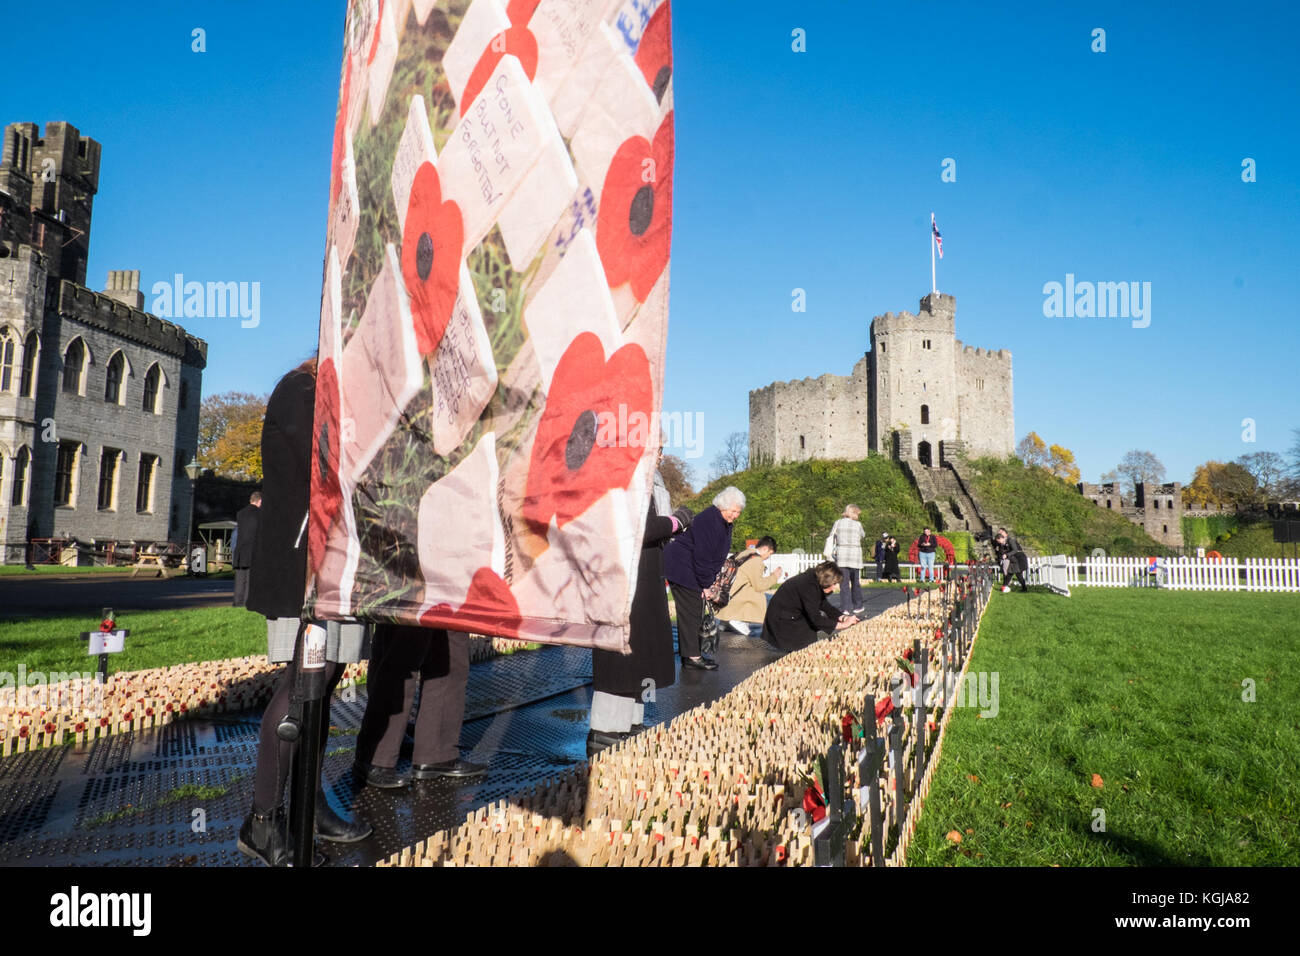 Cardiff, UK. 8th Nov, 2017.The Royal British Legion Field of Remembrance Service held at Cardiff Castle, centre of Cardiff, Wales, UK, on a sunny blue sky but chilly morning.Dignitaries included Secretary of State for Wales, First Minister of Wales, and included dedication and prayers led by The Reverend Canon Stewart Lisk. The official opening of the Cardiff Field of Remembrance took place on Wednesday 8 November at 11am. Credit: Paul Quayle/Alamy Live News Stock Photo